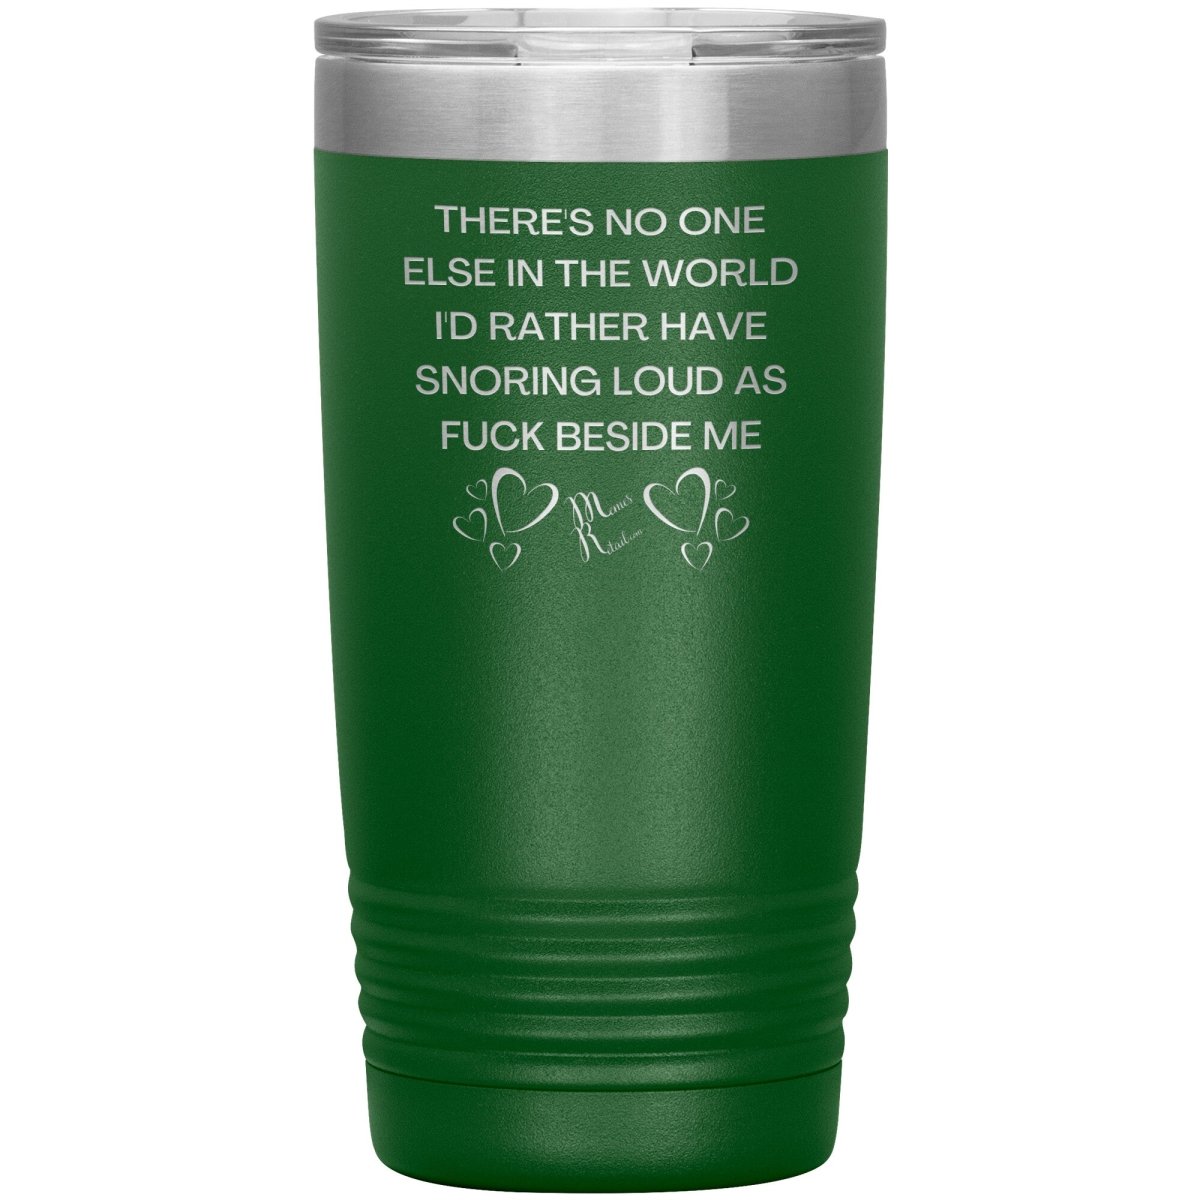 There's No One Else in the World I'd Rather Have Snoring Loud, 20oz Insulated Tumbler / Green - MemesRetail.com